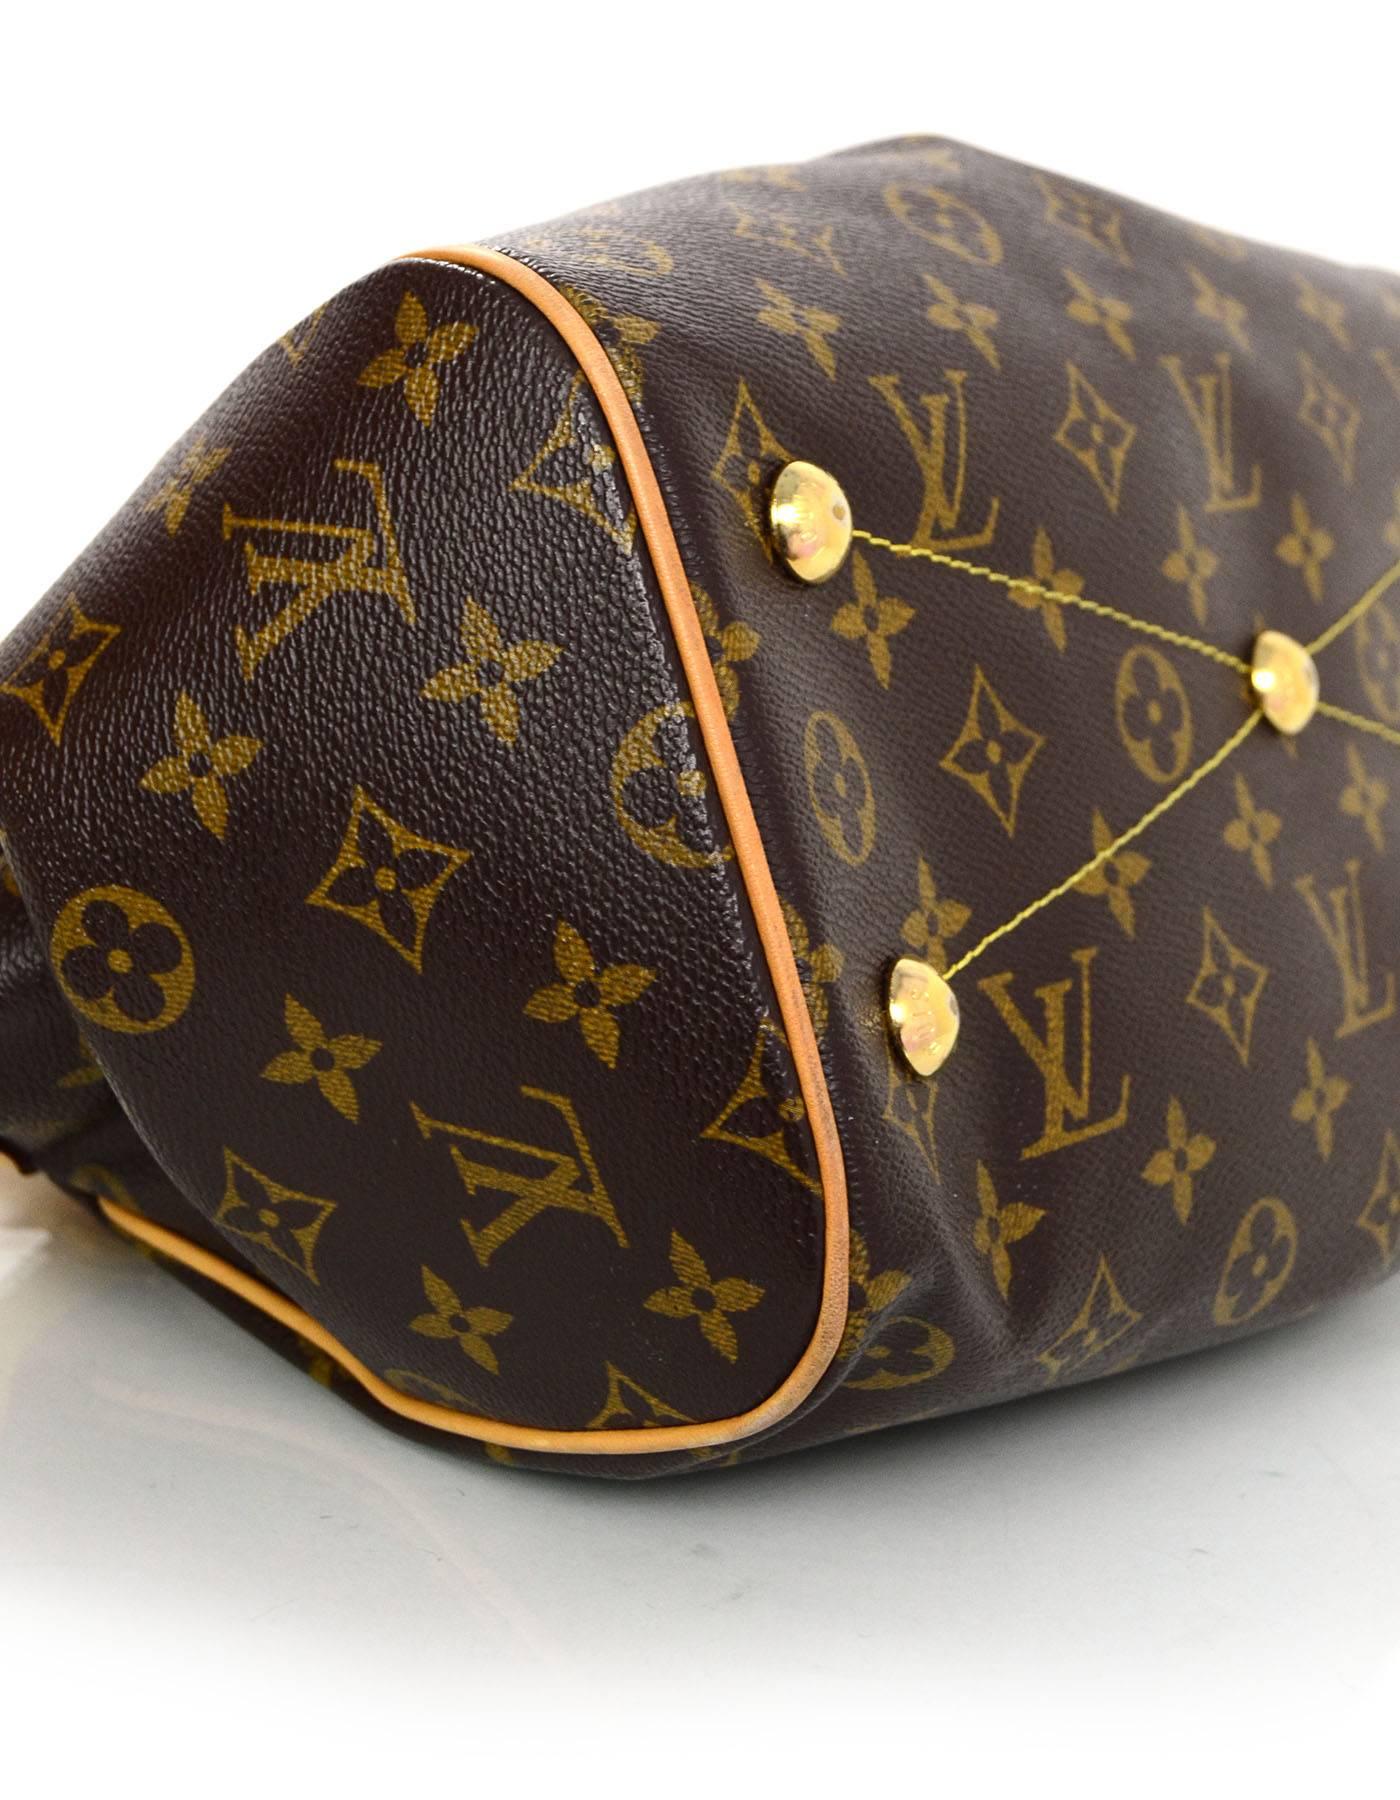 Louis Vuitton Monogram Tivoli PM Tote Bag In Excellent Condition In New York, NY